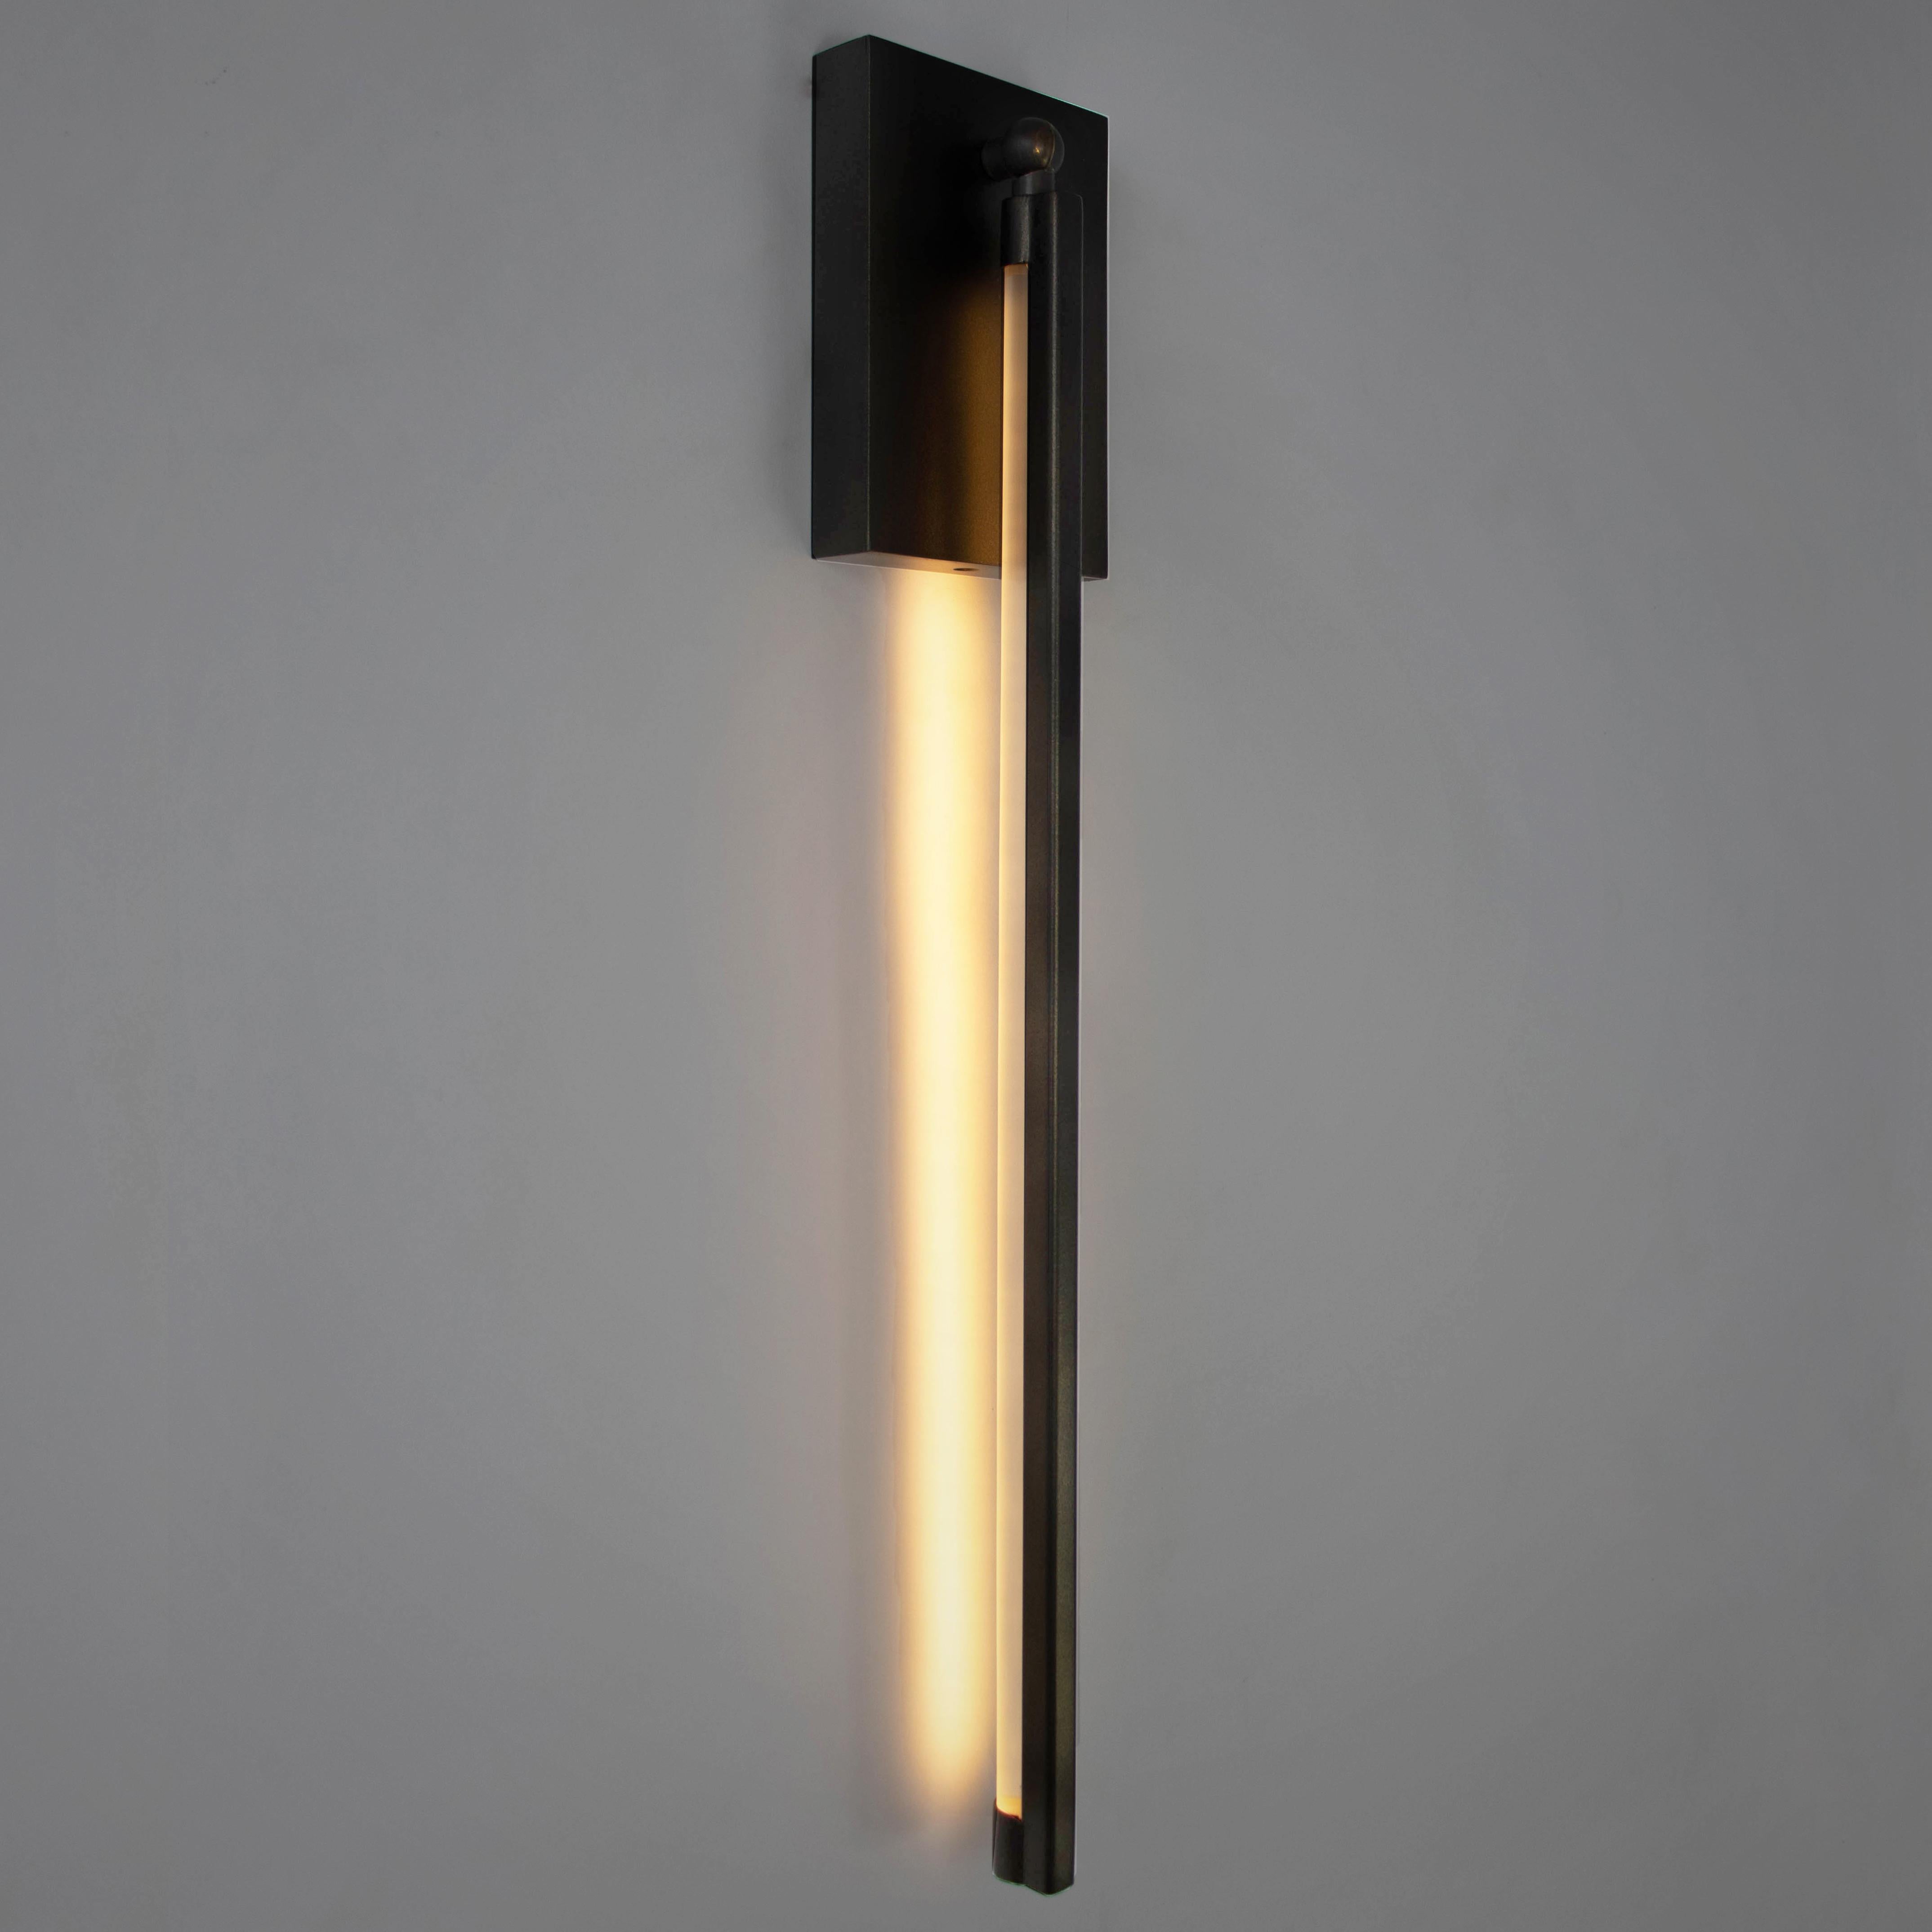 The RAY slim wall sconce is built from cold-rolled steel, and is diffused by a minimal frosted, round acrylic rod. The fixture is back-lit with warm white LED strip. The diffuser for this wall sconce can be positioned inward or outward facing by